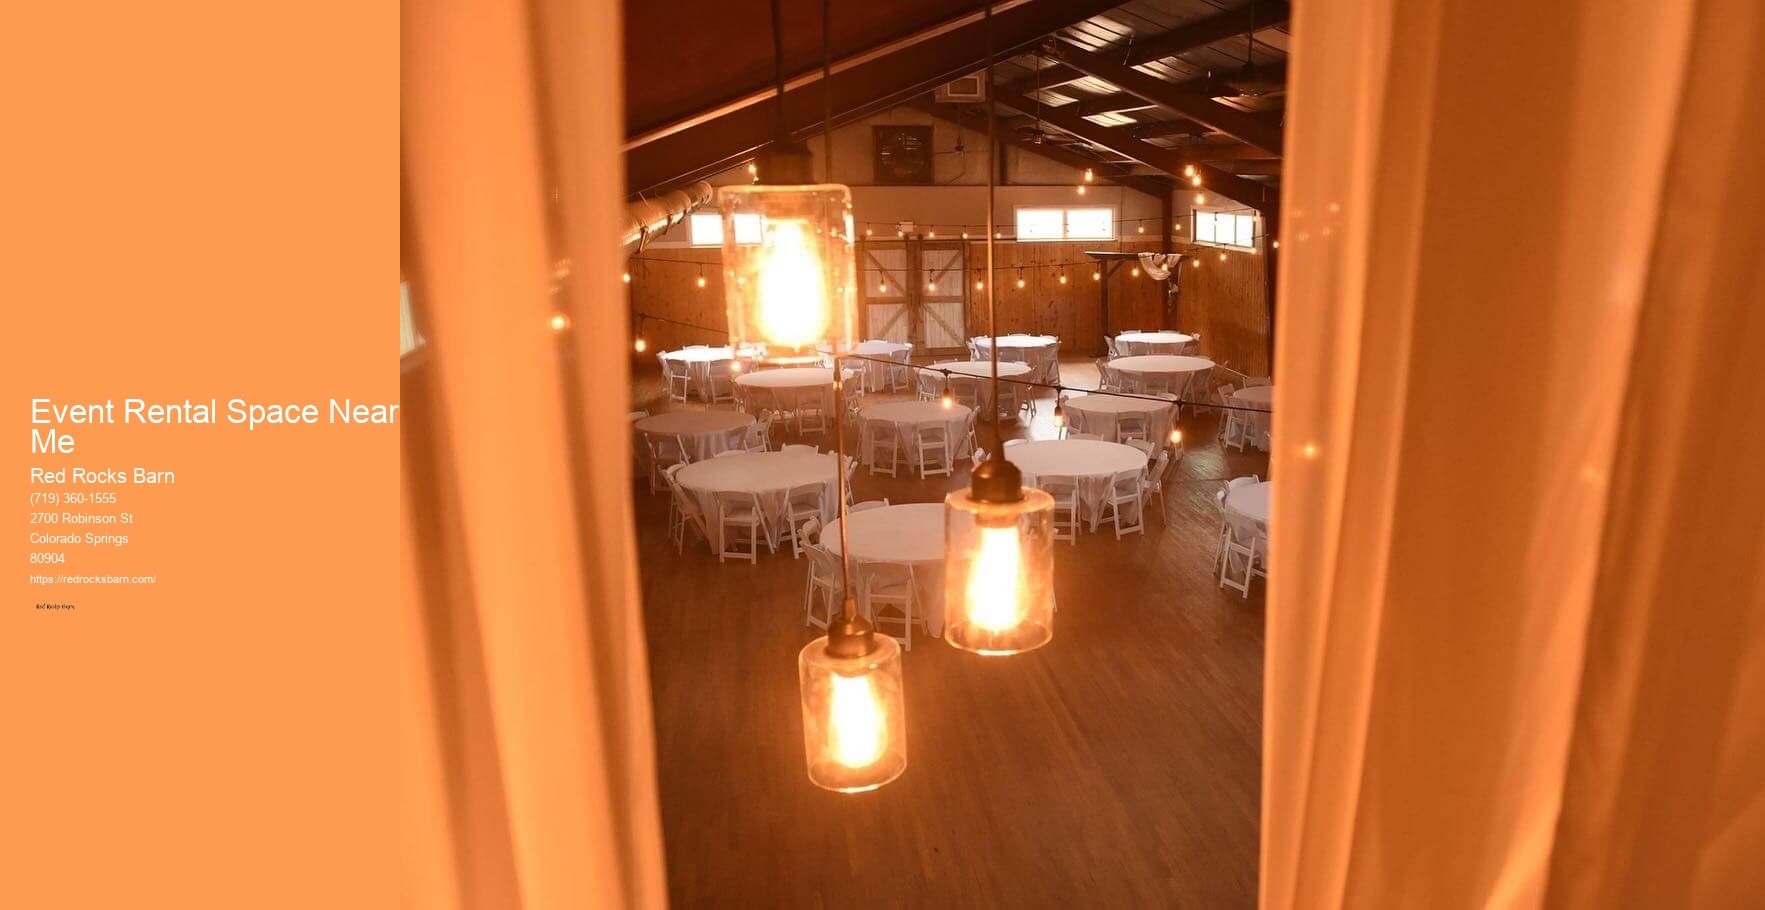 Event Rental Space Near Me